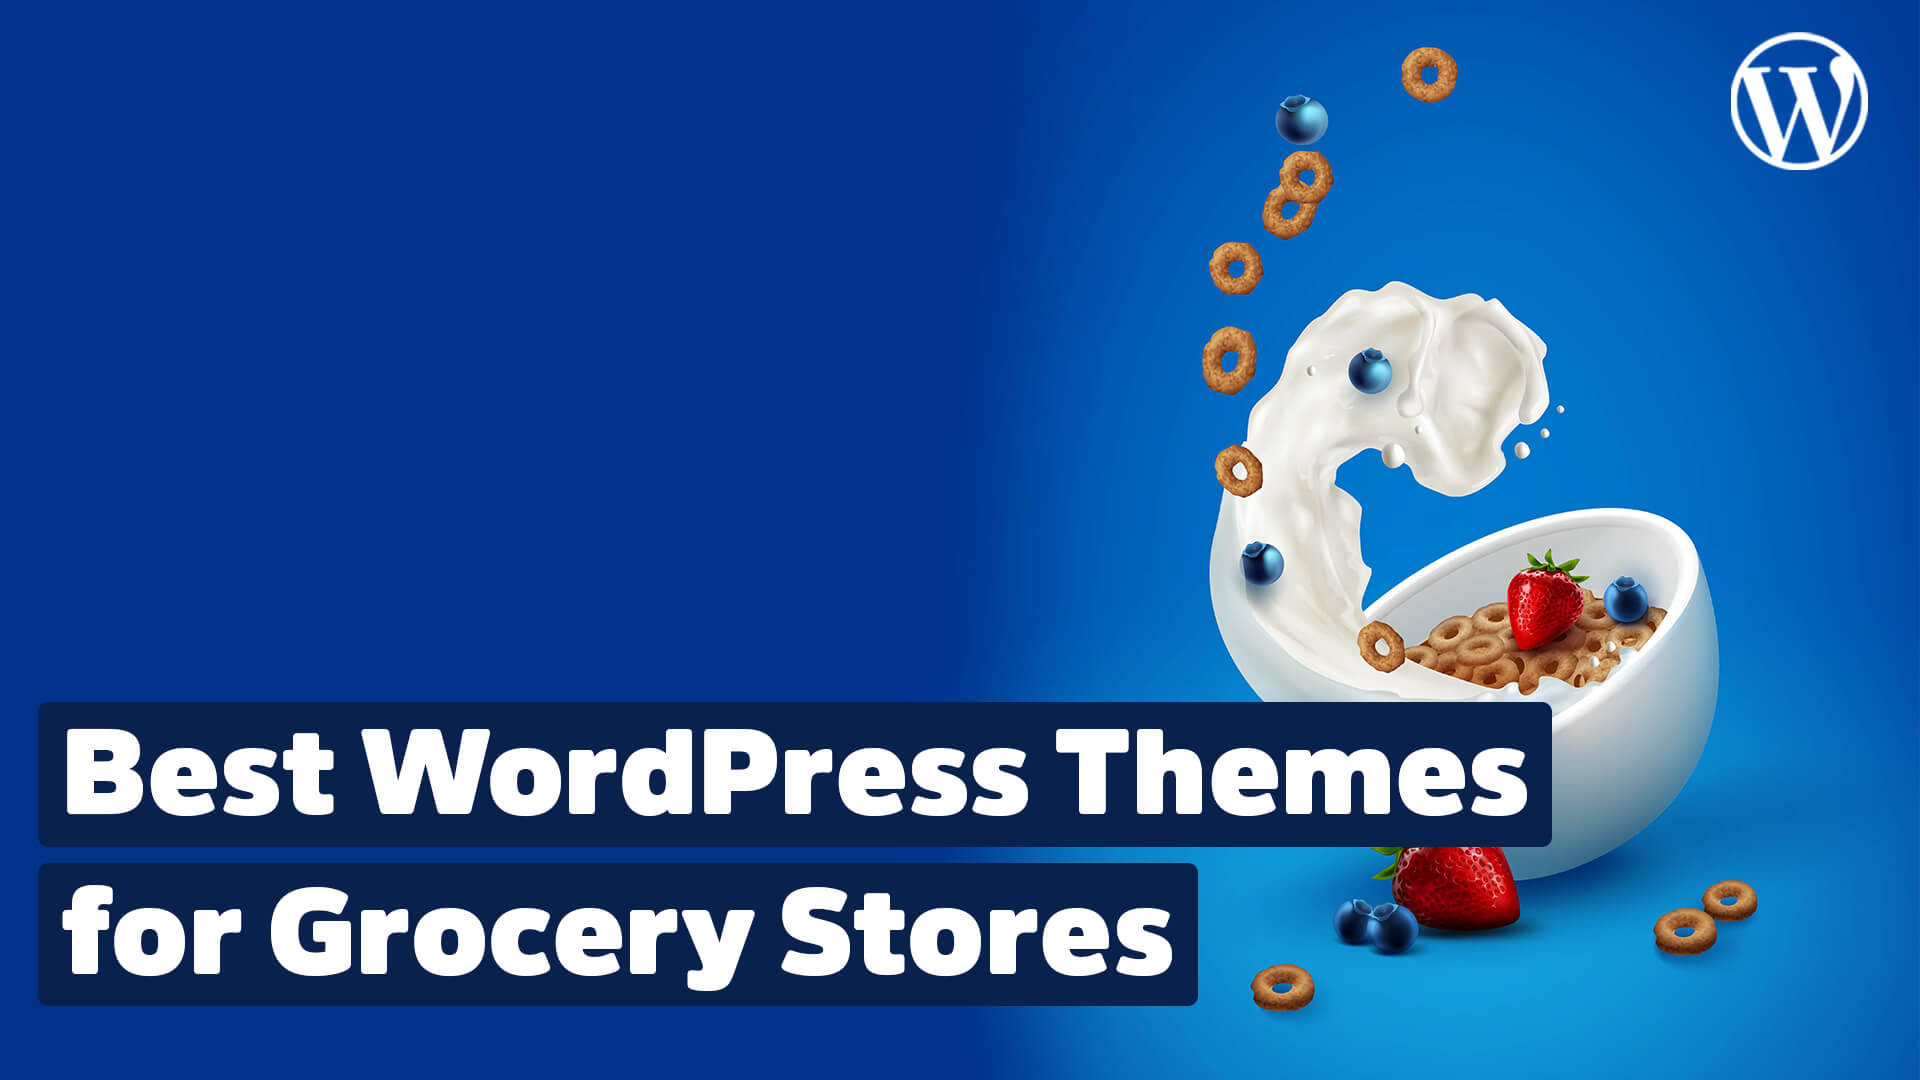 WordPress Themes for Grocery Stores